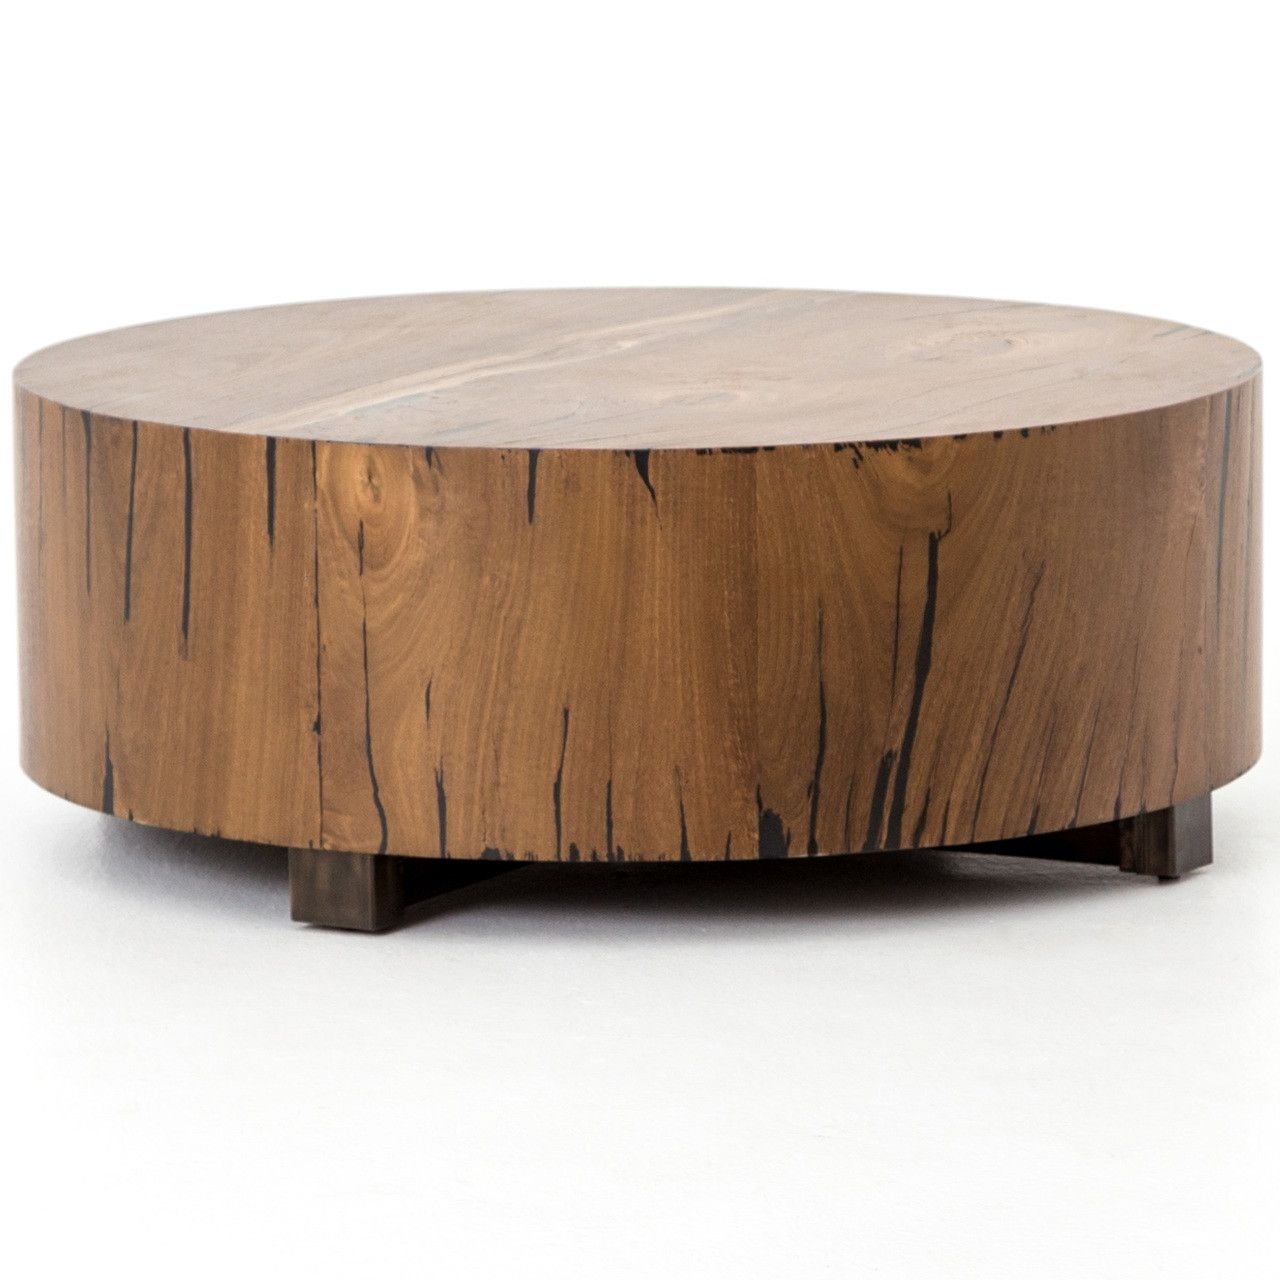 Hudson Round Natural Yukas Wood Block Coffee Table | Zin Home Throughout Coffee Tables With Round Wooden Tops (Gallery 5 of 20)